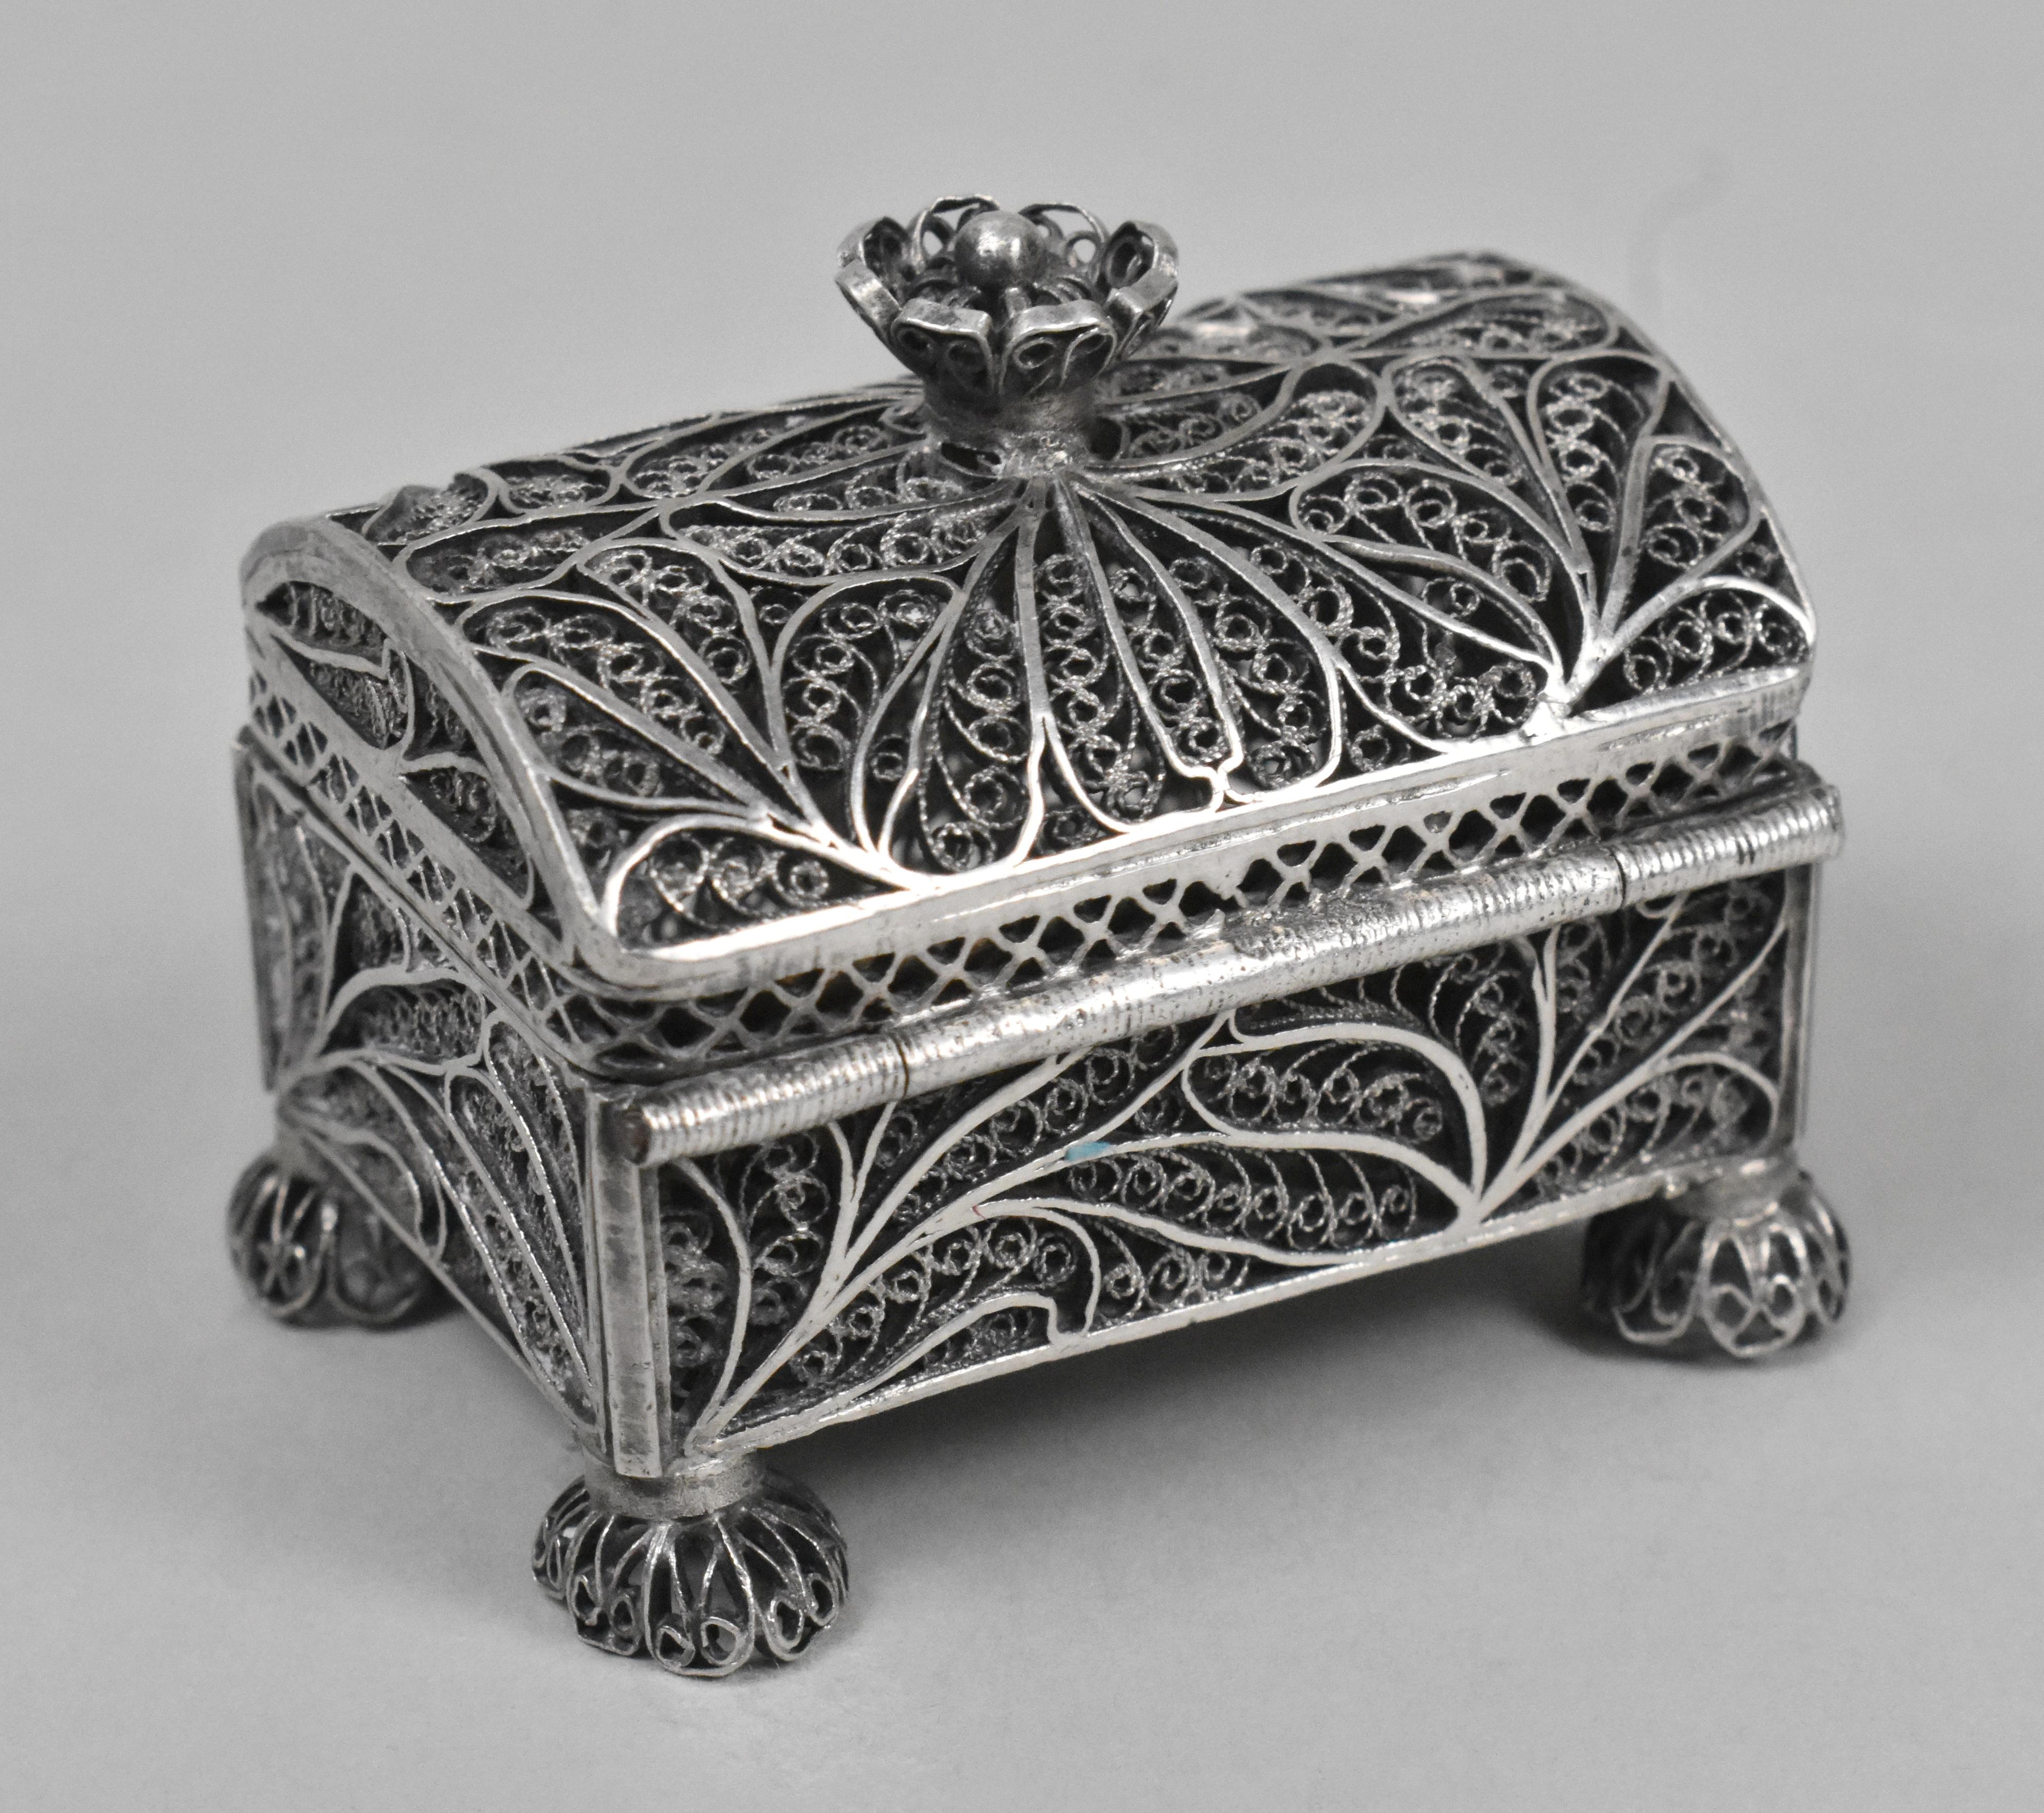 Russian 88 silver 1887 filigree spice Besamim box. Rectangular form with floral finial. 48.7 grams. Very nice condition. Dimensions: 1.5